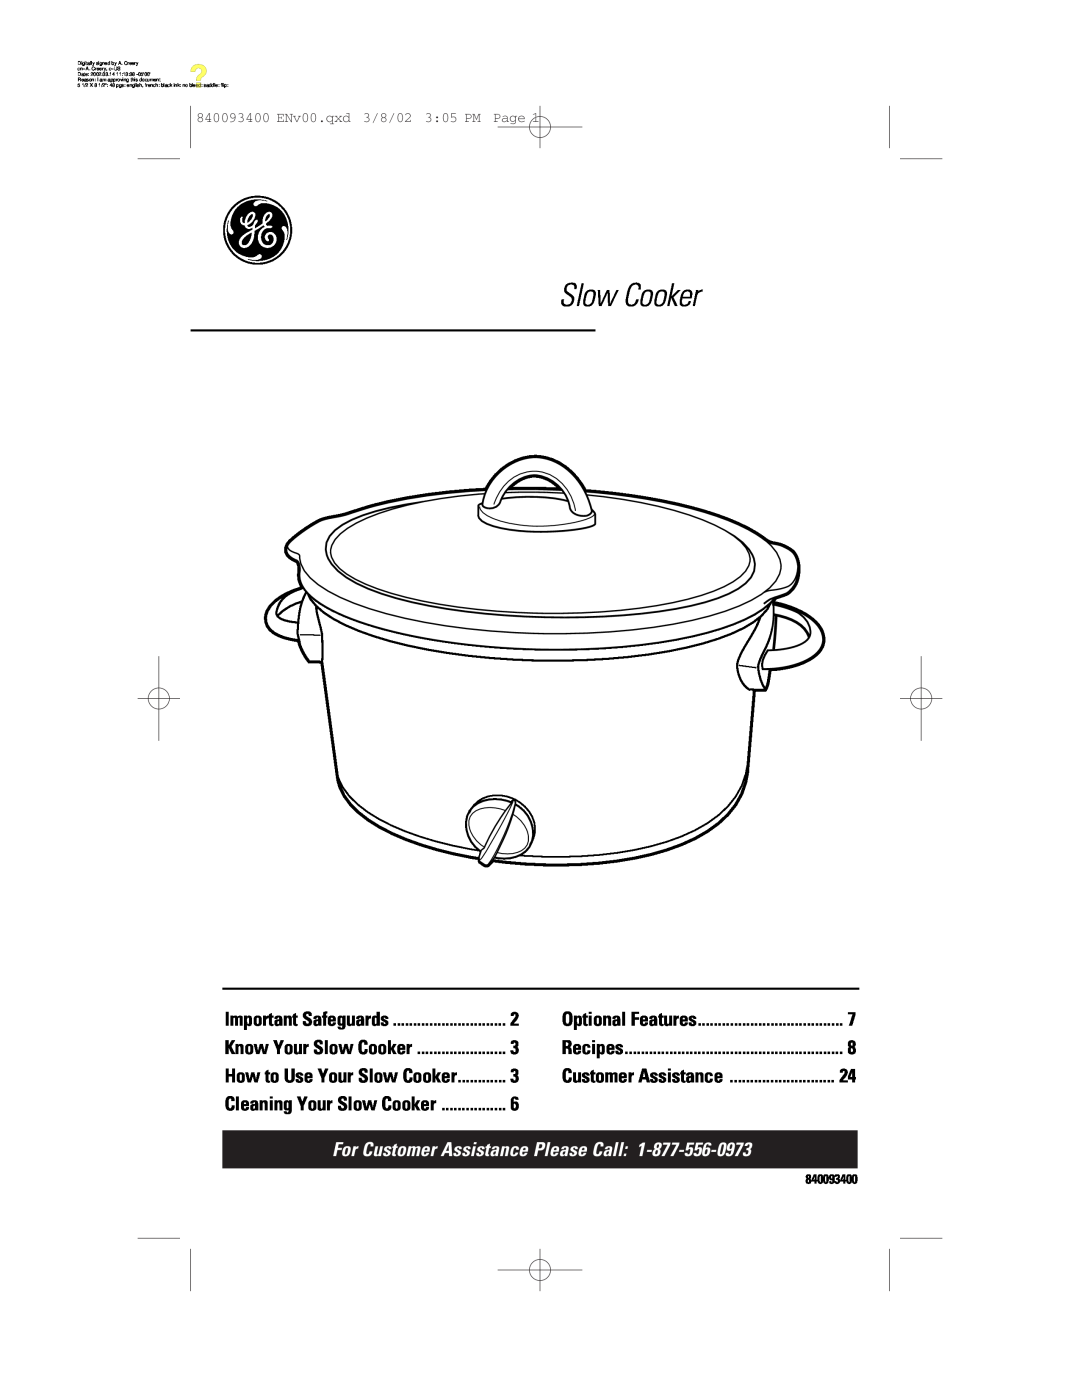 GE 840093400 manual Slow Cooker, For Customer Assistance Please Call, Important Safeguards, Optional Features, Recipes 